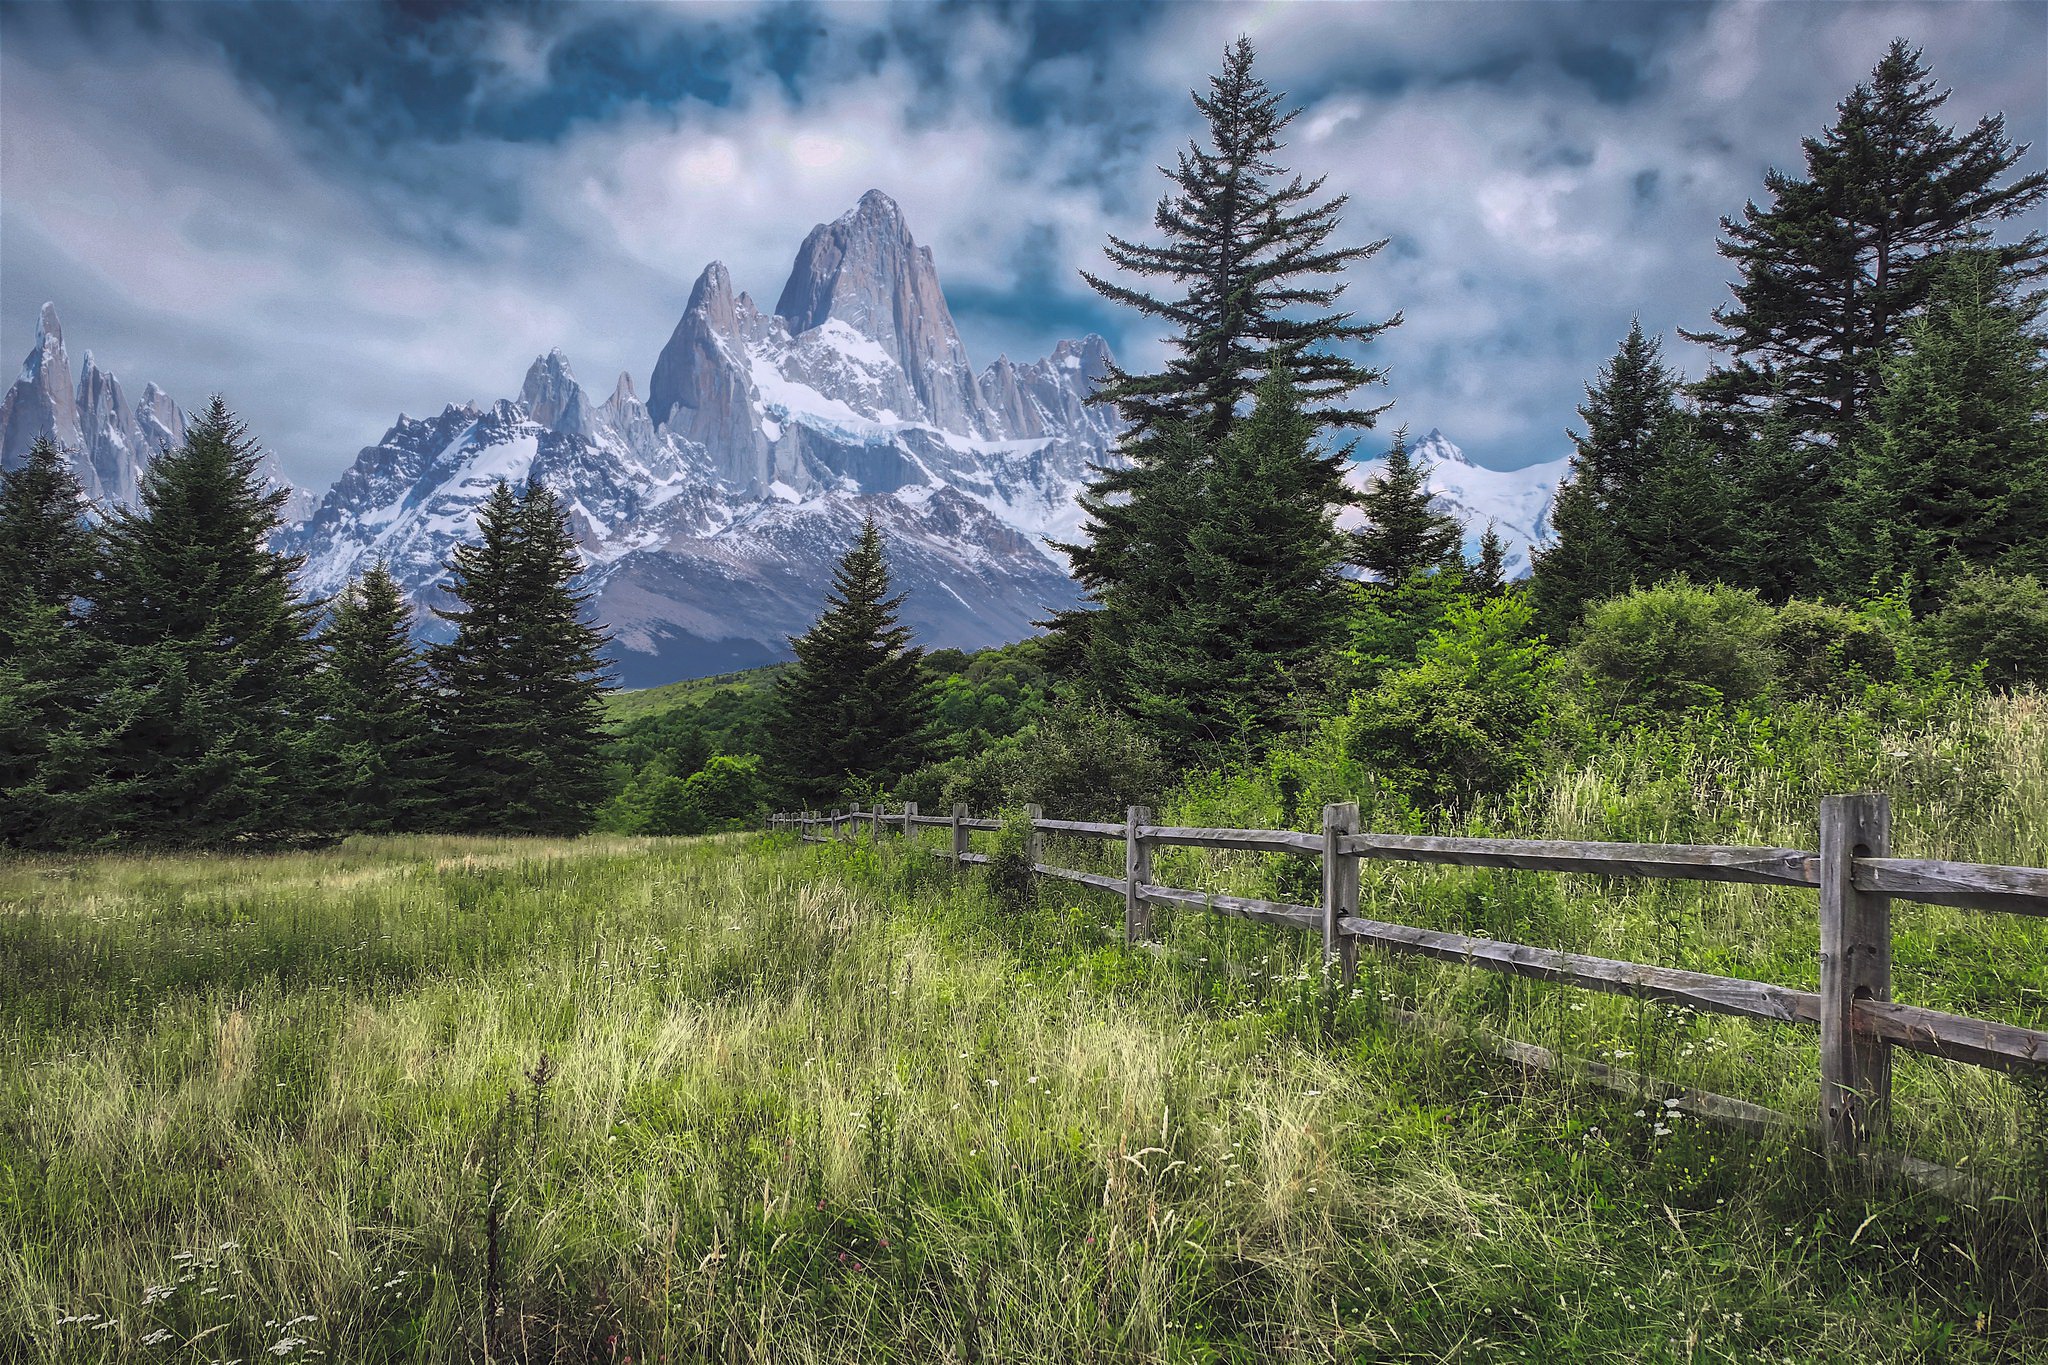 General 2048x1365 fence nature mountains trees outdoors